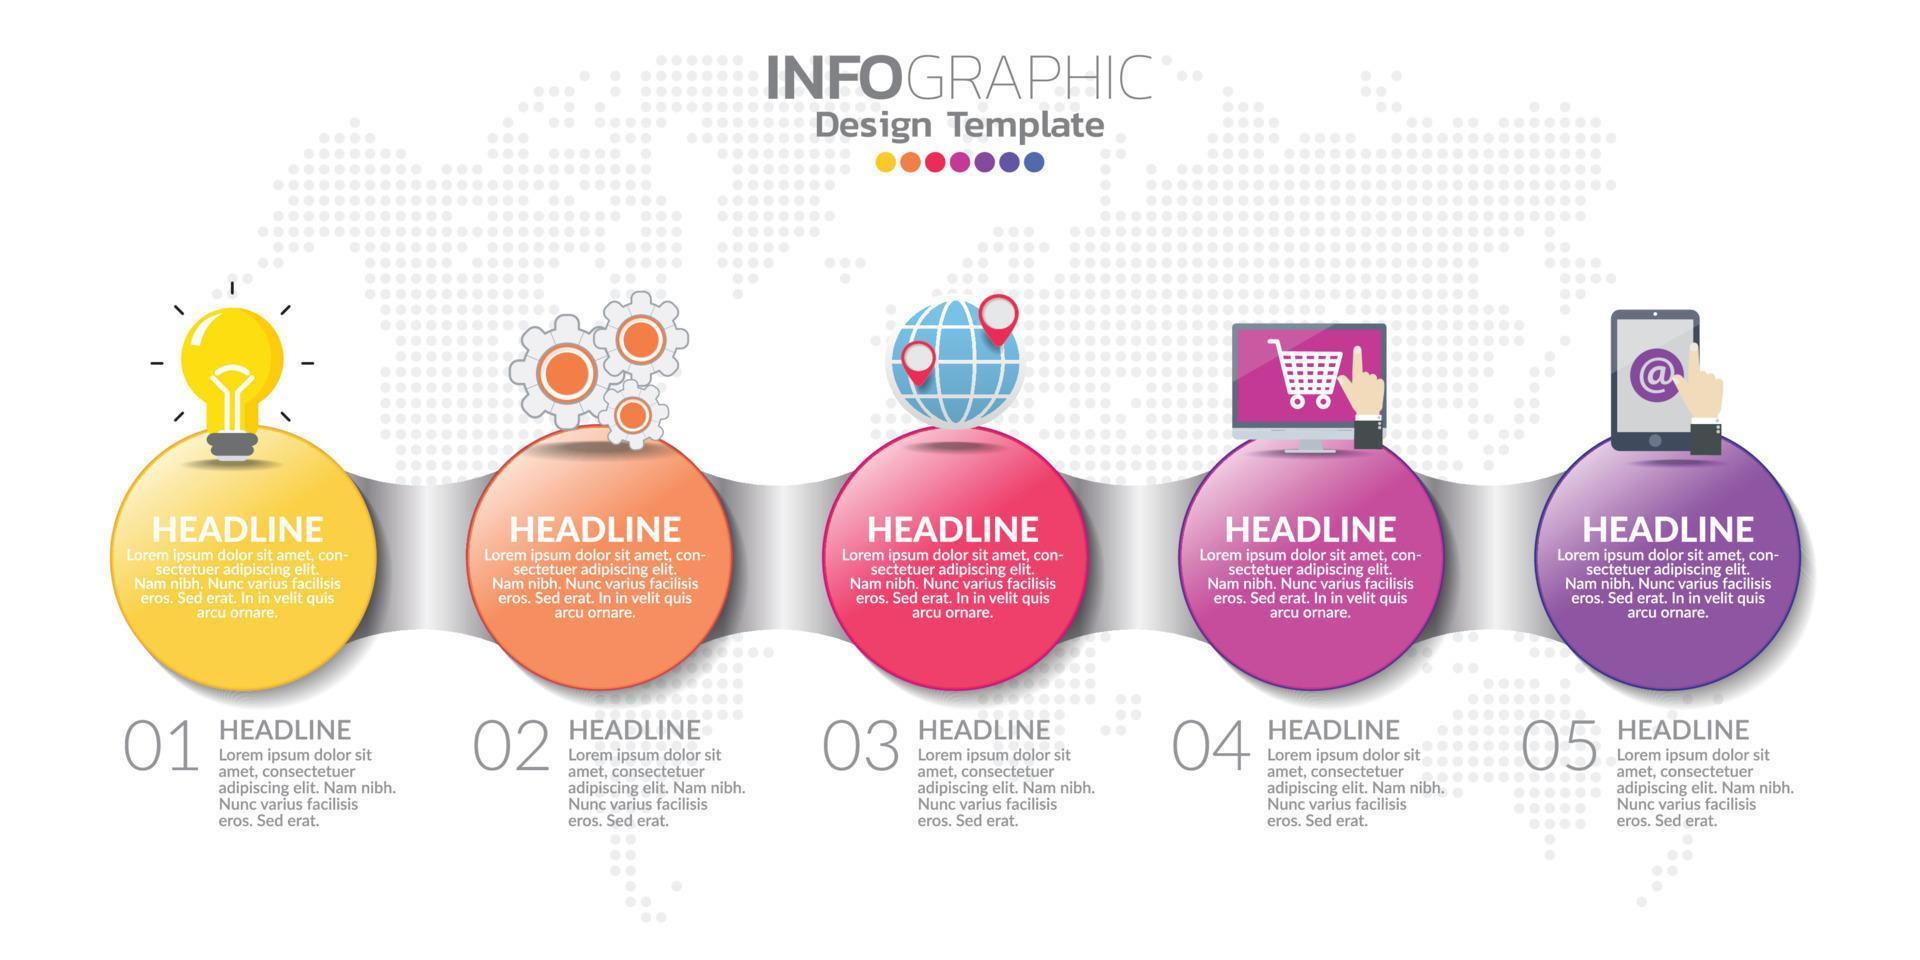 Infographic business concept with 5 options or steps. Vector illustration